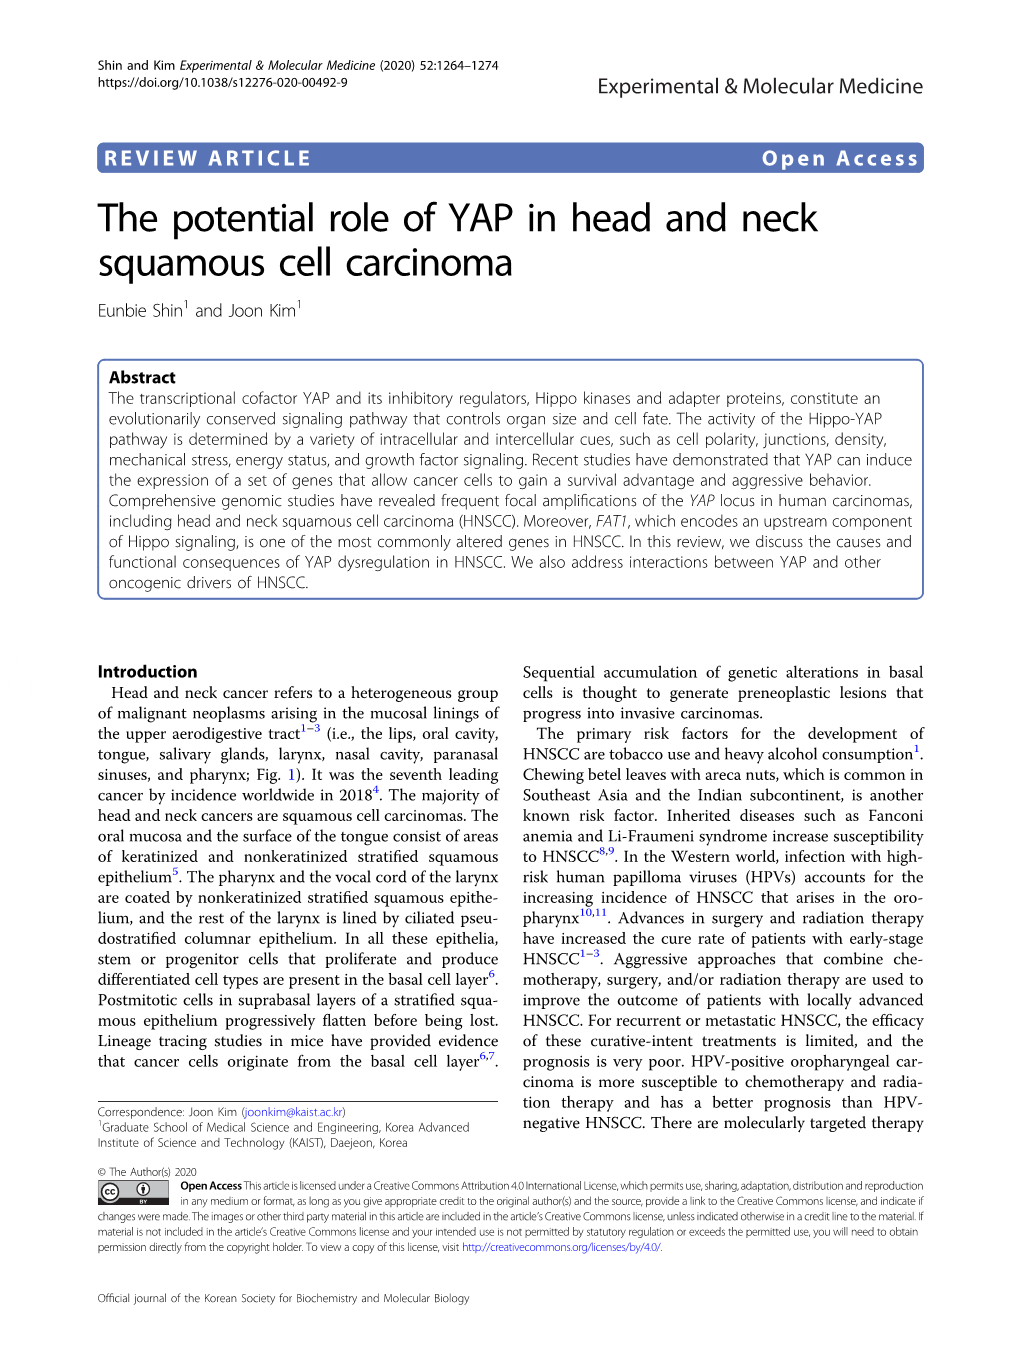 The Potential Role of YAP in Head and Neck Squamous Cell Carcinoma Eunbie Shin1 and Joon Kim1